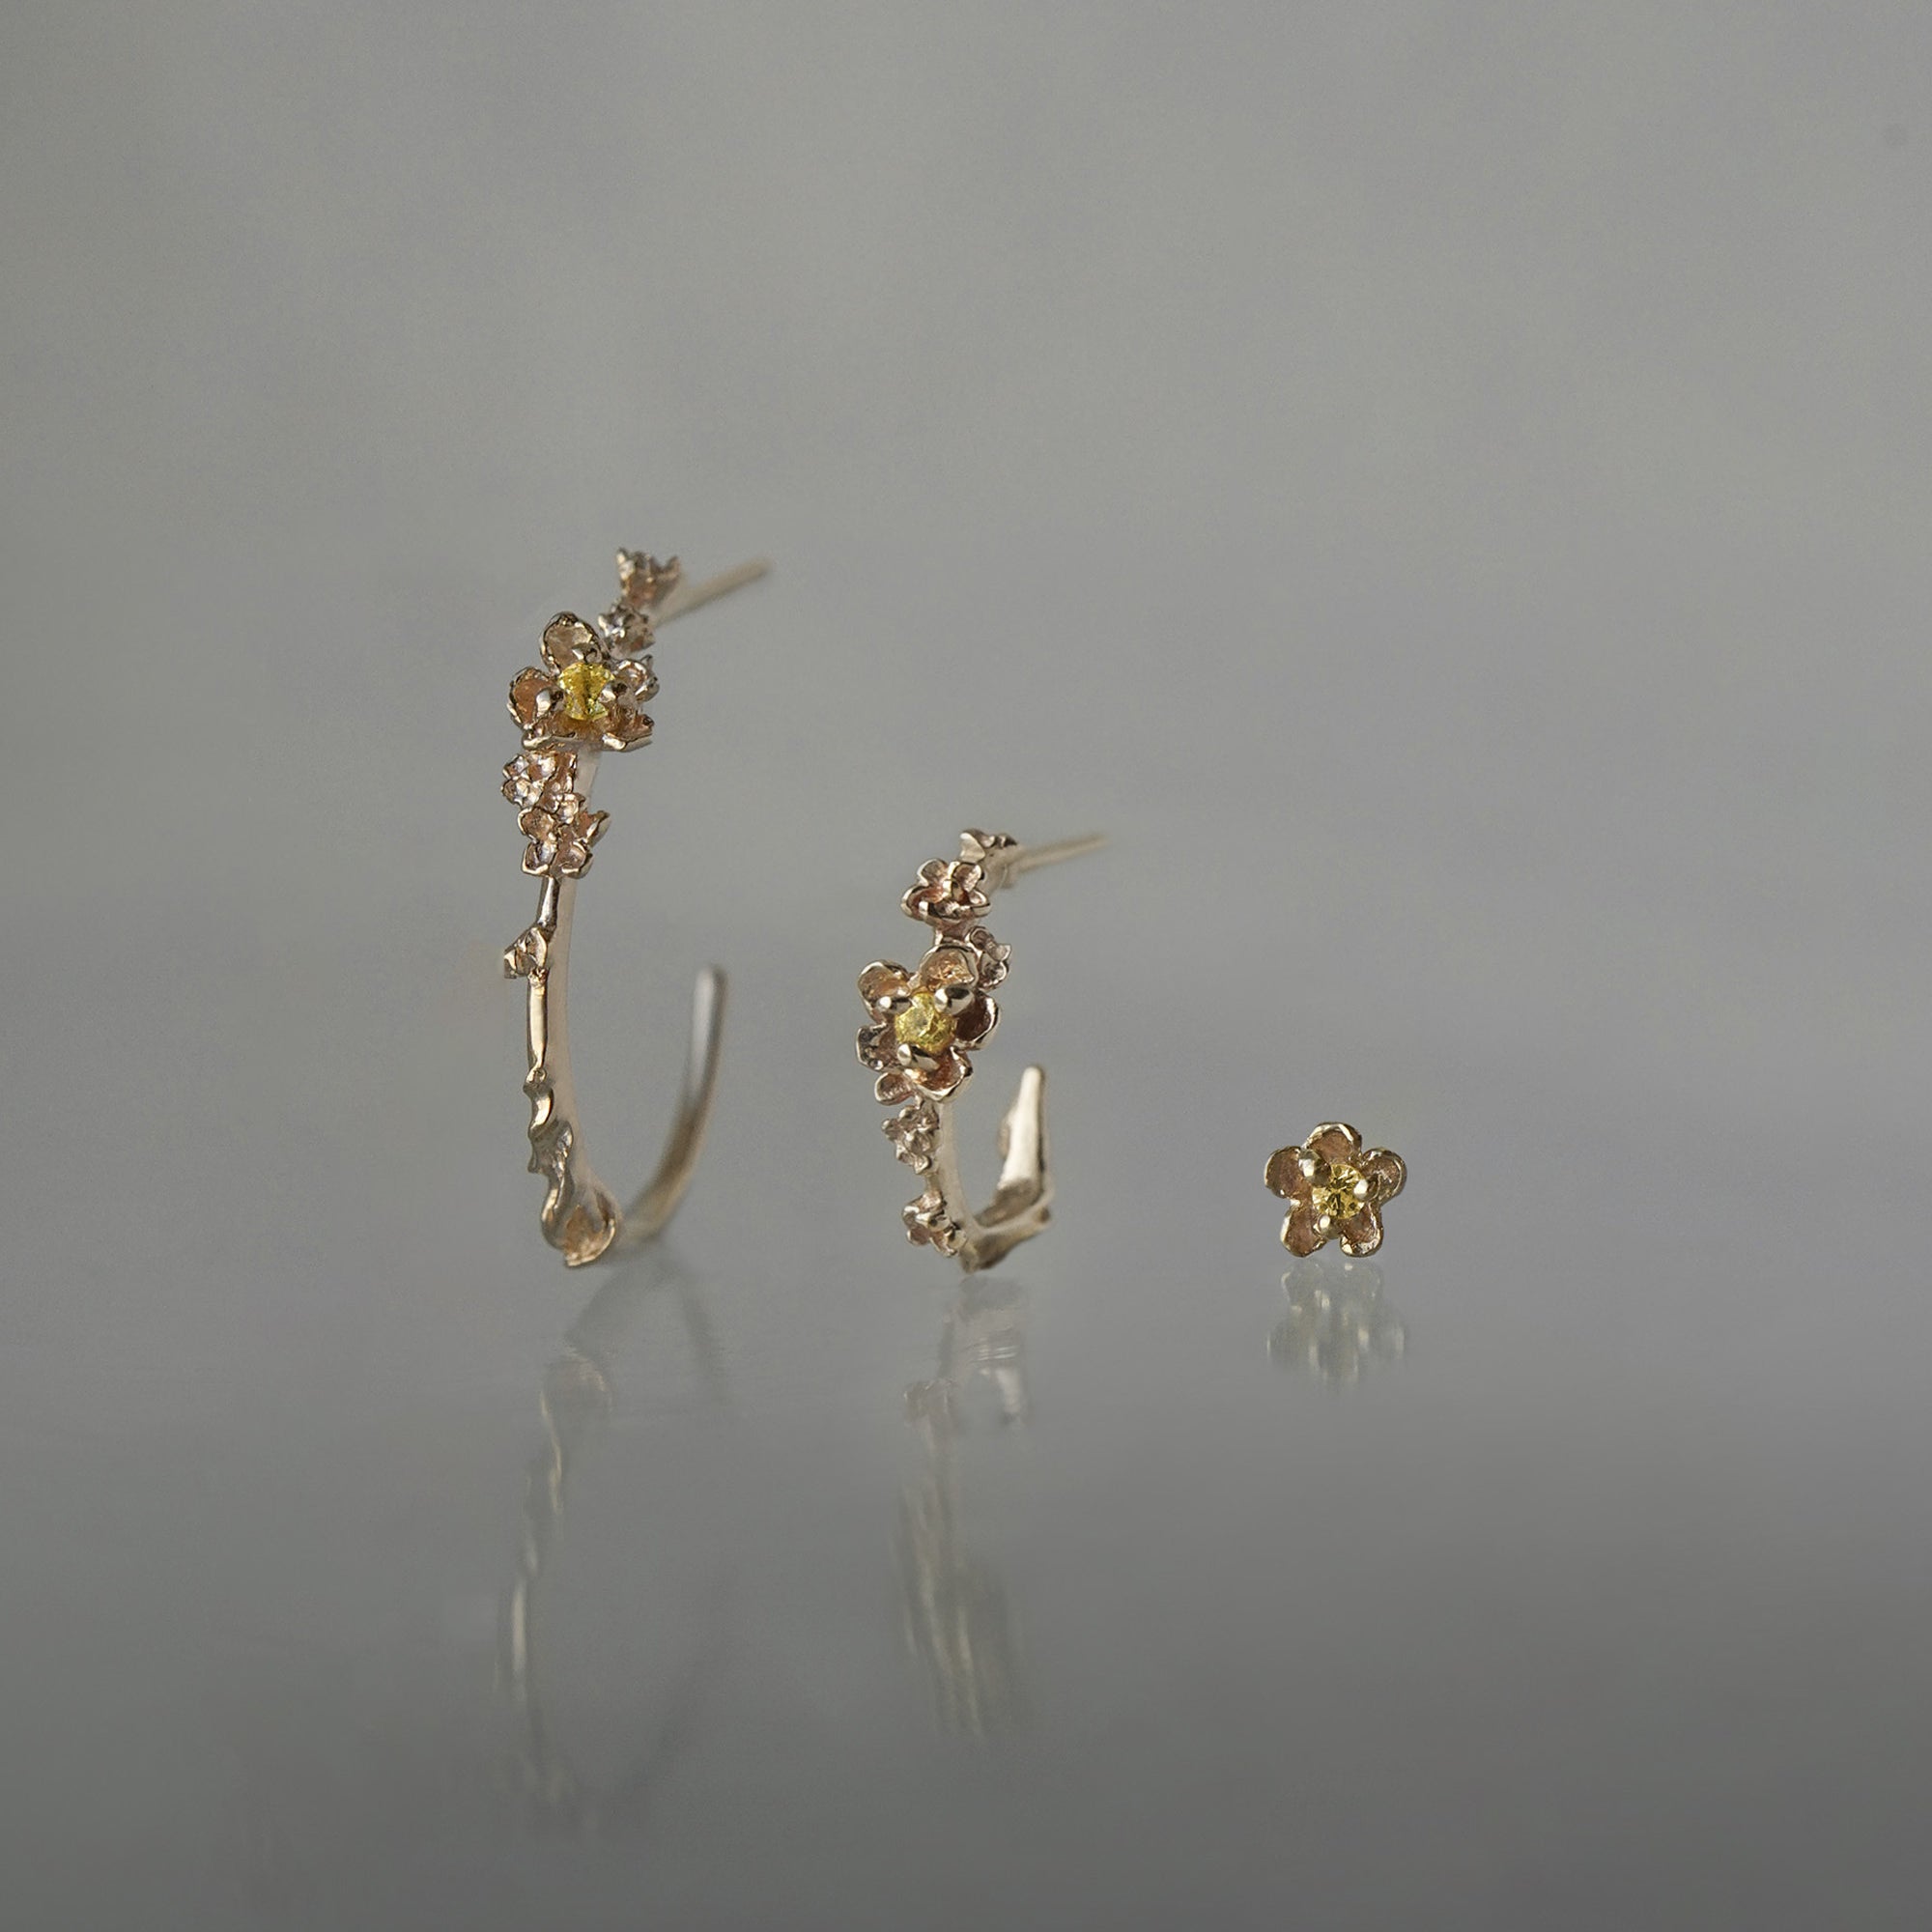 A line-up of three Laurie Fleming Jewellery earrings over a medium grey background. On the left, a large buttercup hoop. In the middle,  a small buttercup hoop. On the right, a buttercup stud earring. All three earrings feature hand-carved petite buttercup flower blossoms with yellow sapphire centres.